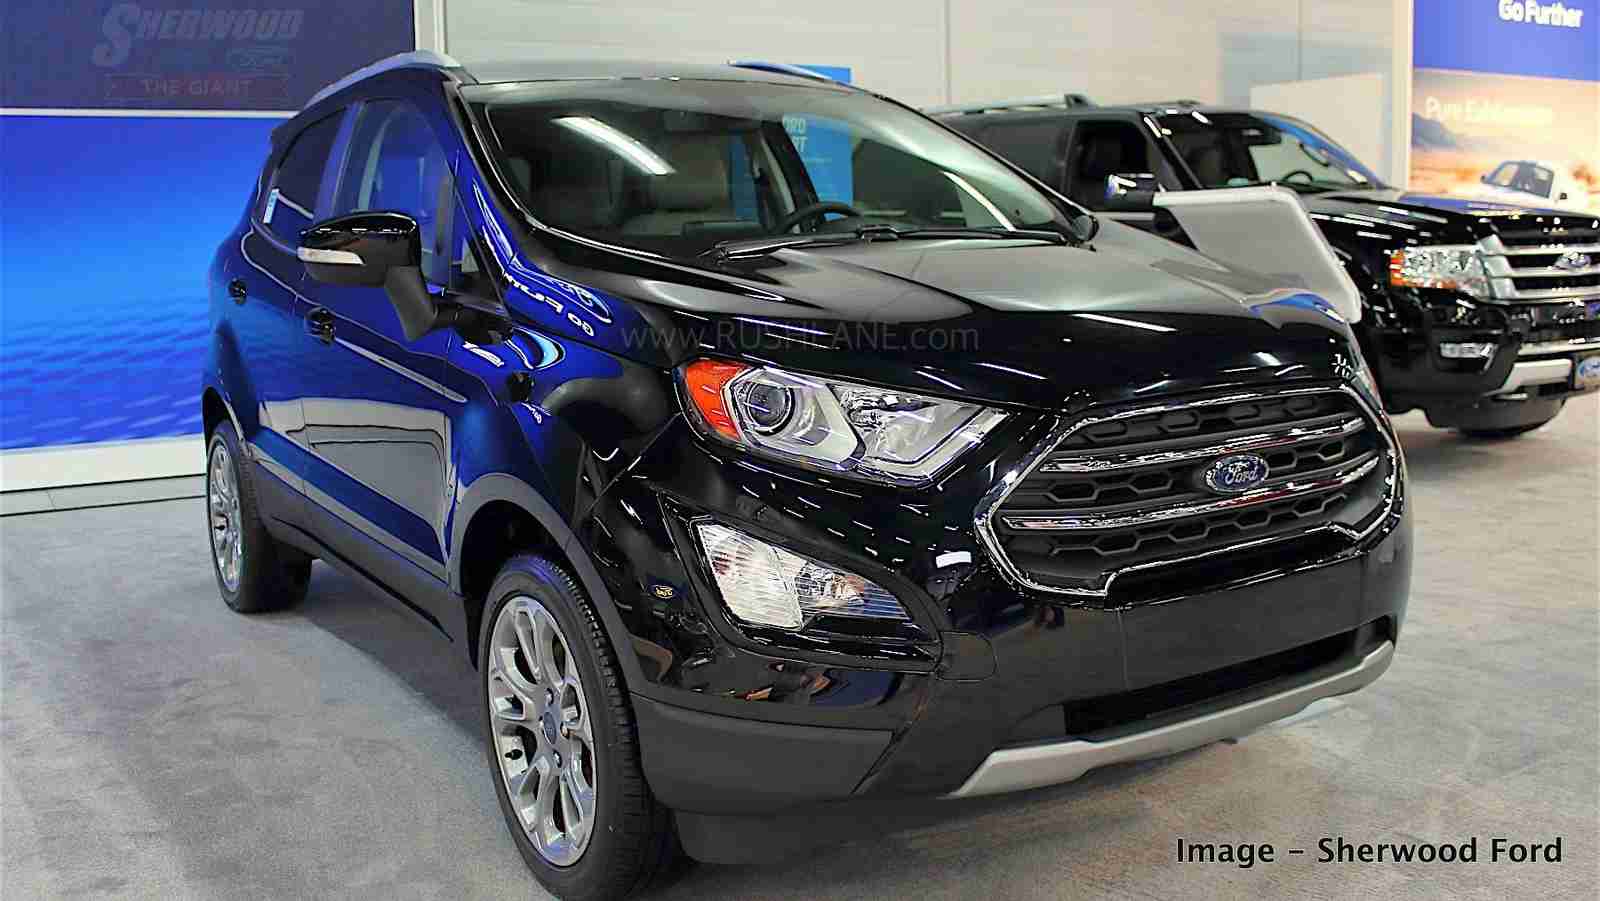 Ford EcoSport exported from India